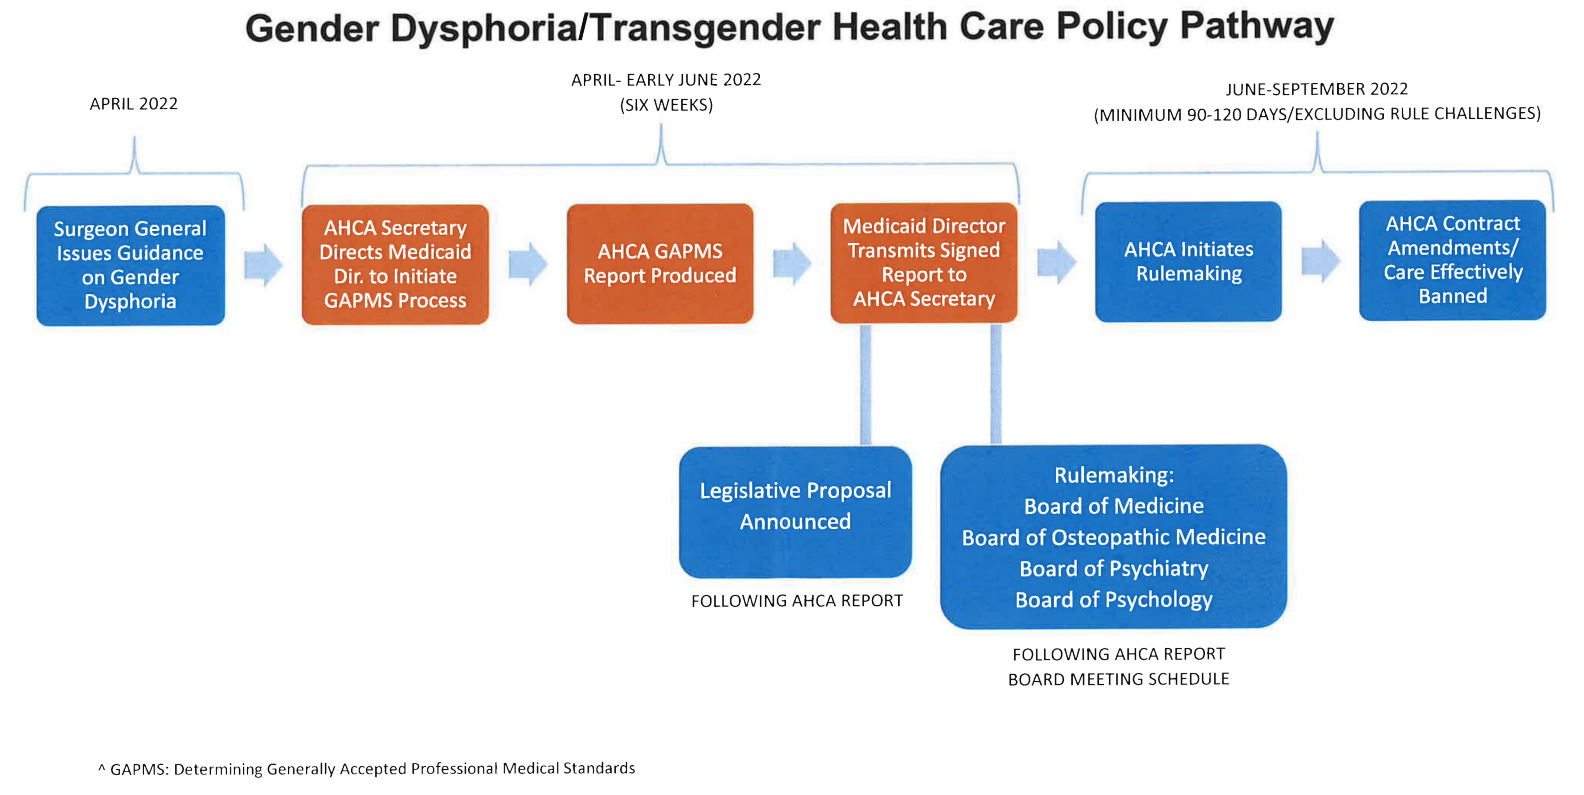 Plaintiffs’ trial exhibit 296. Gender Dysphoria/Transgender Health Care Policy Pathway. APRIL 2022 - Surgeon General Issues Guidance on Gender Dysphoria. APRIL- EARLY JUNE 2022 (SIX WEEKS) - AHCA Secretary Directs Medicaid Dir. to Initiate GAPMS Process. AHCA GAPMS Report Produced. Medicaid Director Transmits Signed Report to AHCA Secretary. FOLLOWING AHCA REPORT - Legislative Proposal Announced. FOLLOWING AHCA REPORT BOARD MEETING SCHEDULE – Rulemaking: Board of Medicine, Board of Osteopathic Medicine, Board of Psychiatry, Board of Psychology. JUNE-SEPTEMBER 2022 (MINIMUM 90-120 DAYS/EXCLUDING RULE CHALLENGES) - AHCA Initiates Rulemaking. AHCA Contract Amendments/Care Effectively Banned.